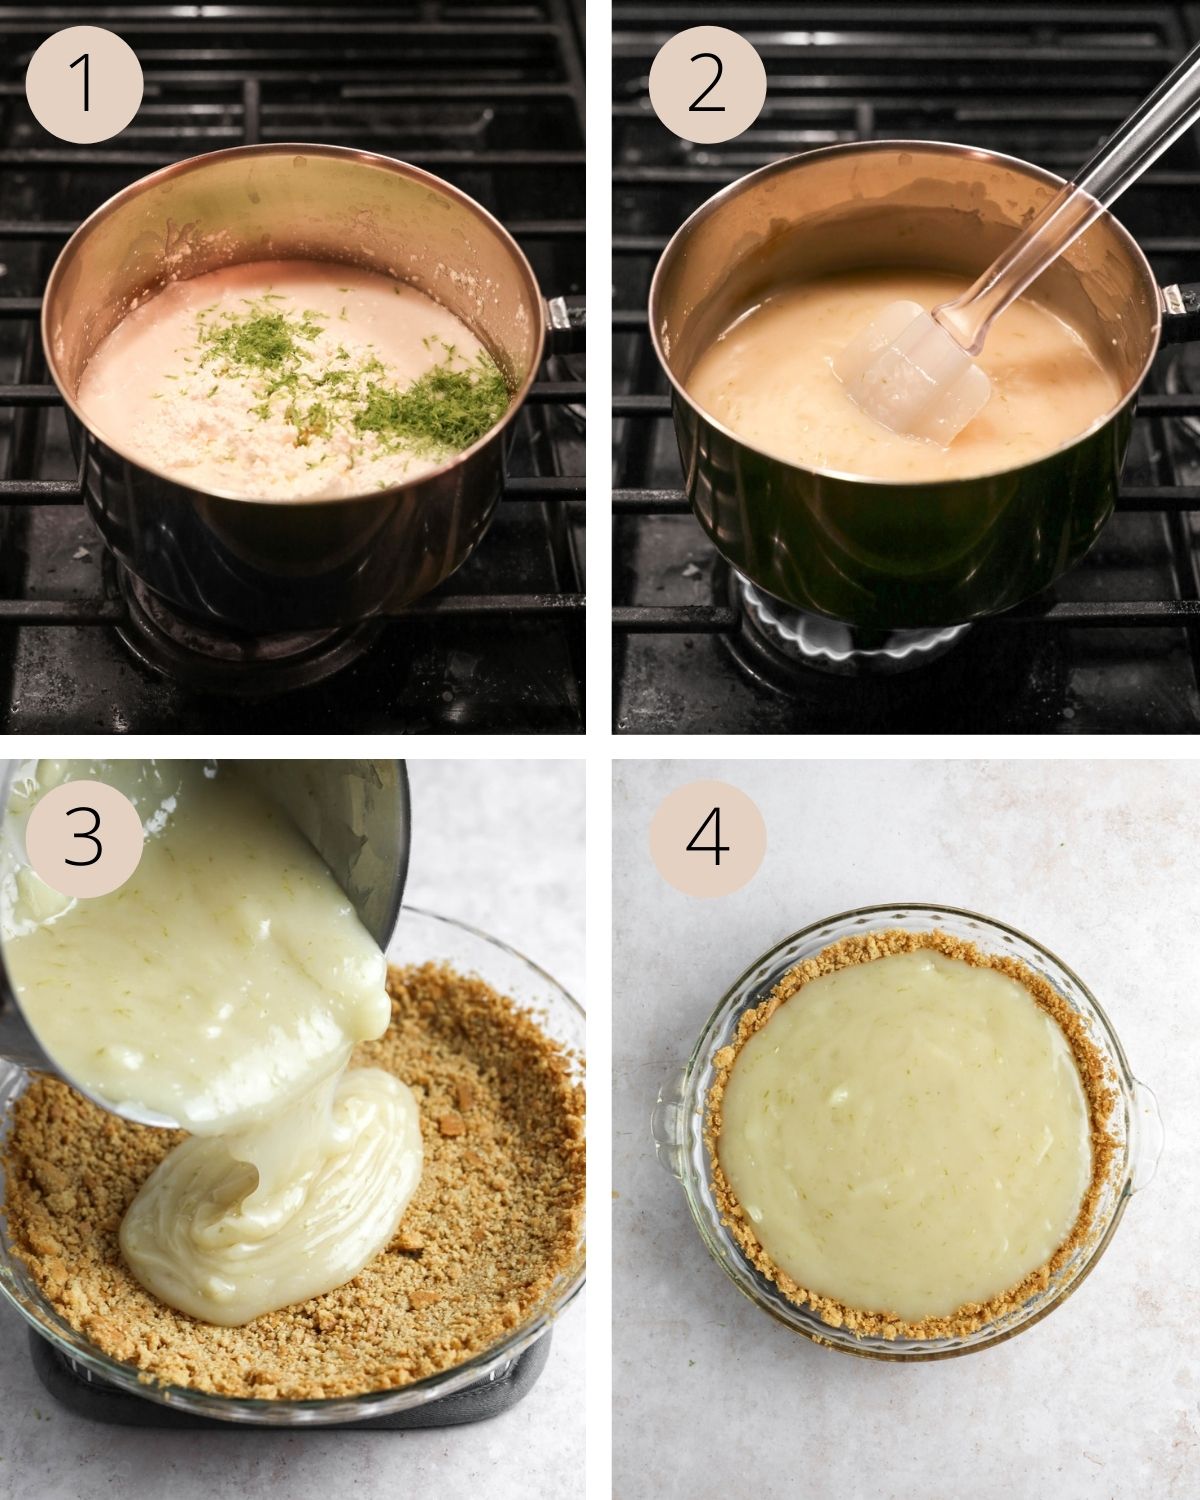 heating the key lime pie filling ingredients in a saucepan on the stove, then pouring the filling into the pie crust.